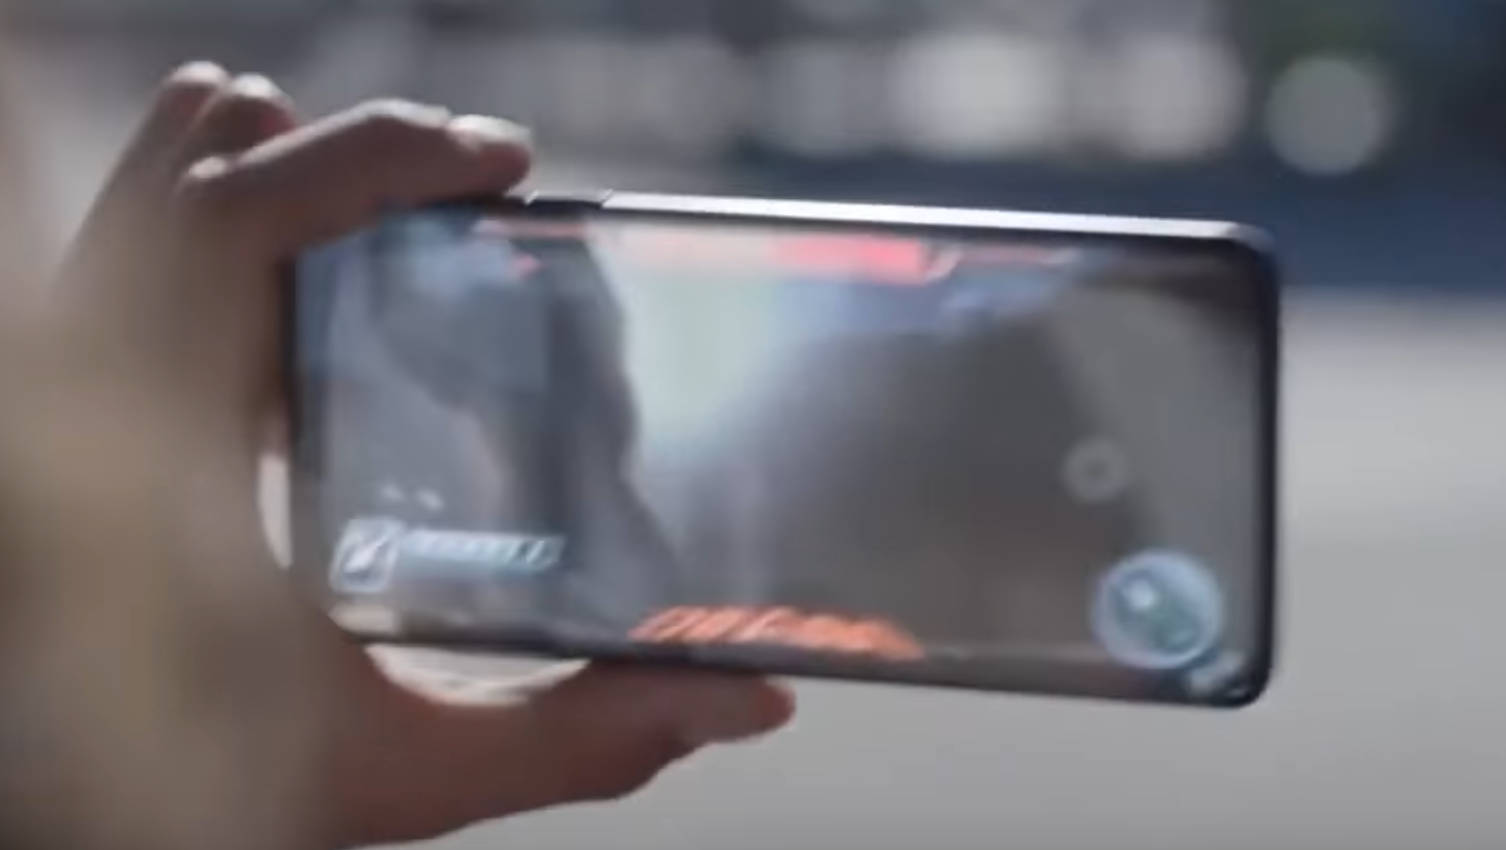 Samsung Galaxy F and Galaxy S10 on a kind-of official teaser